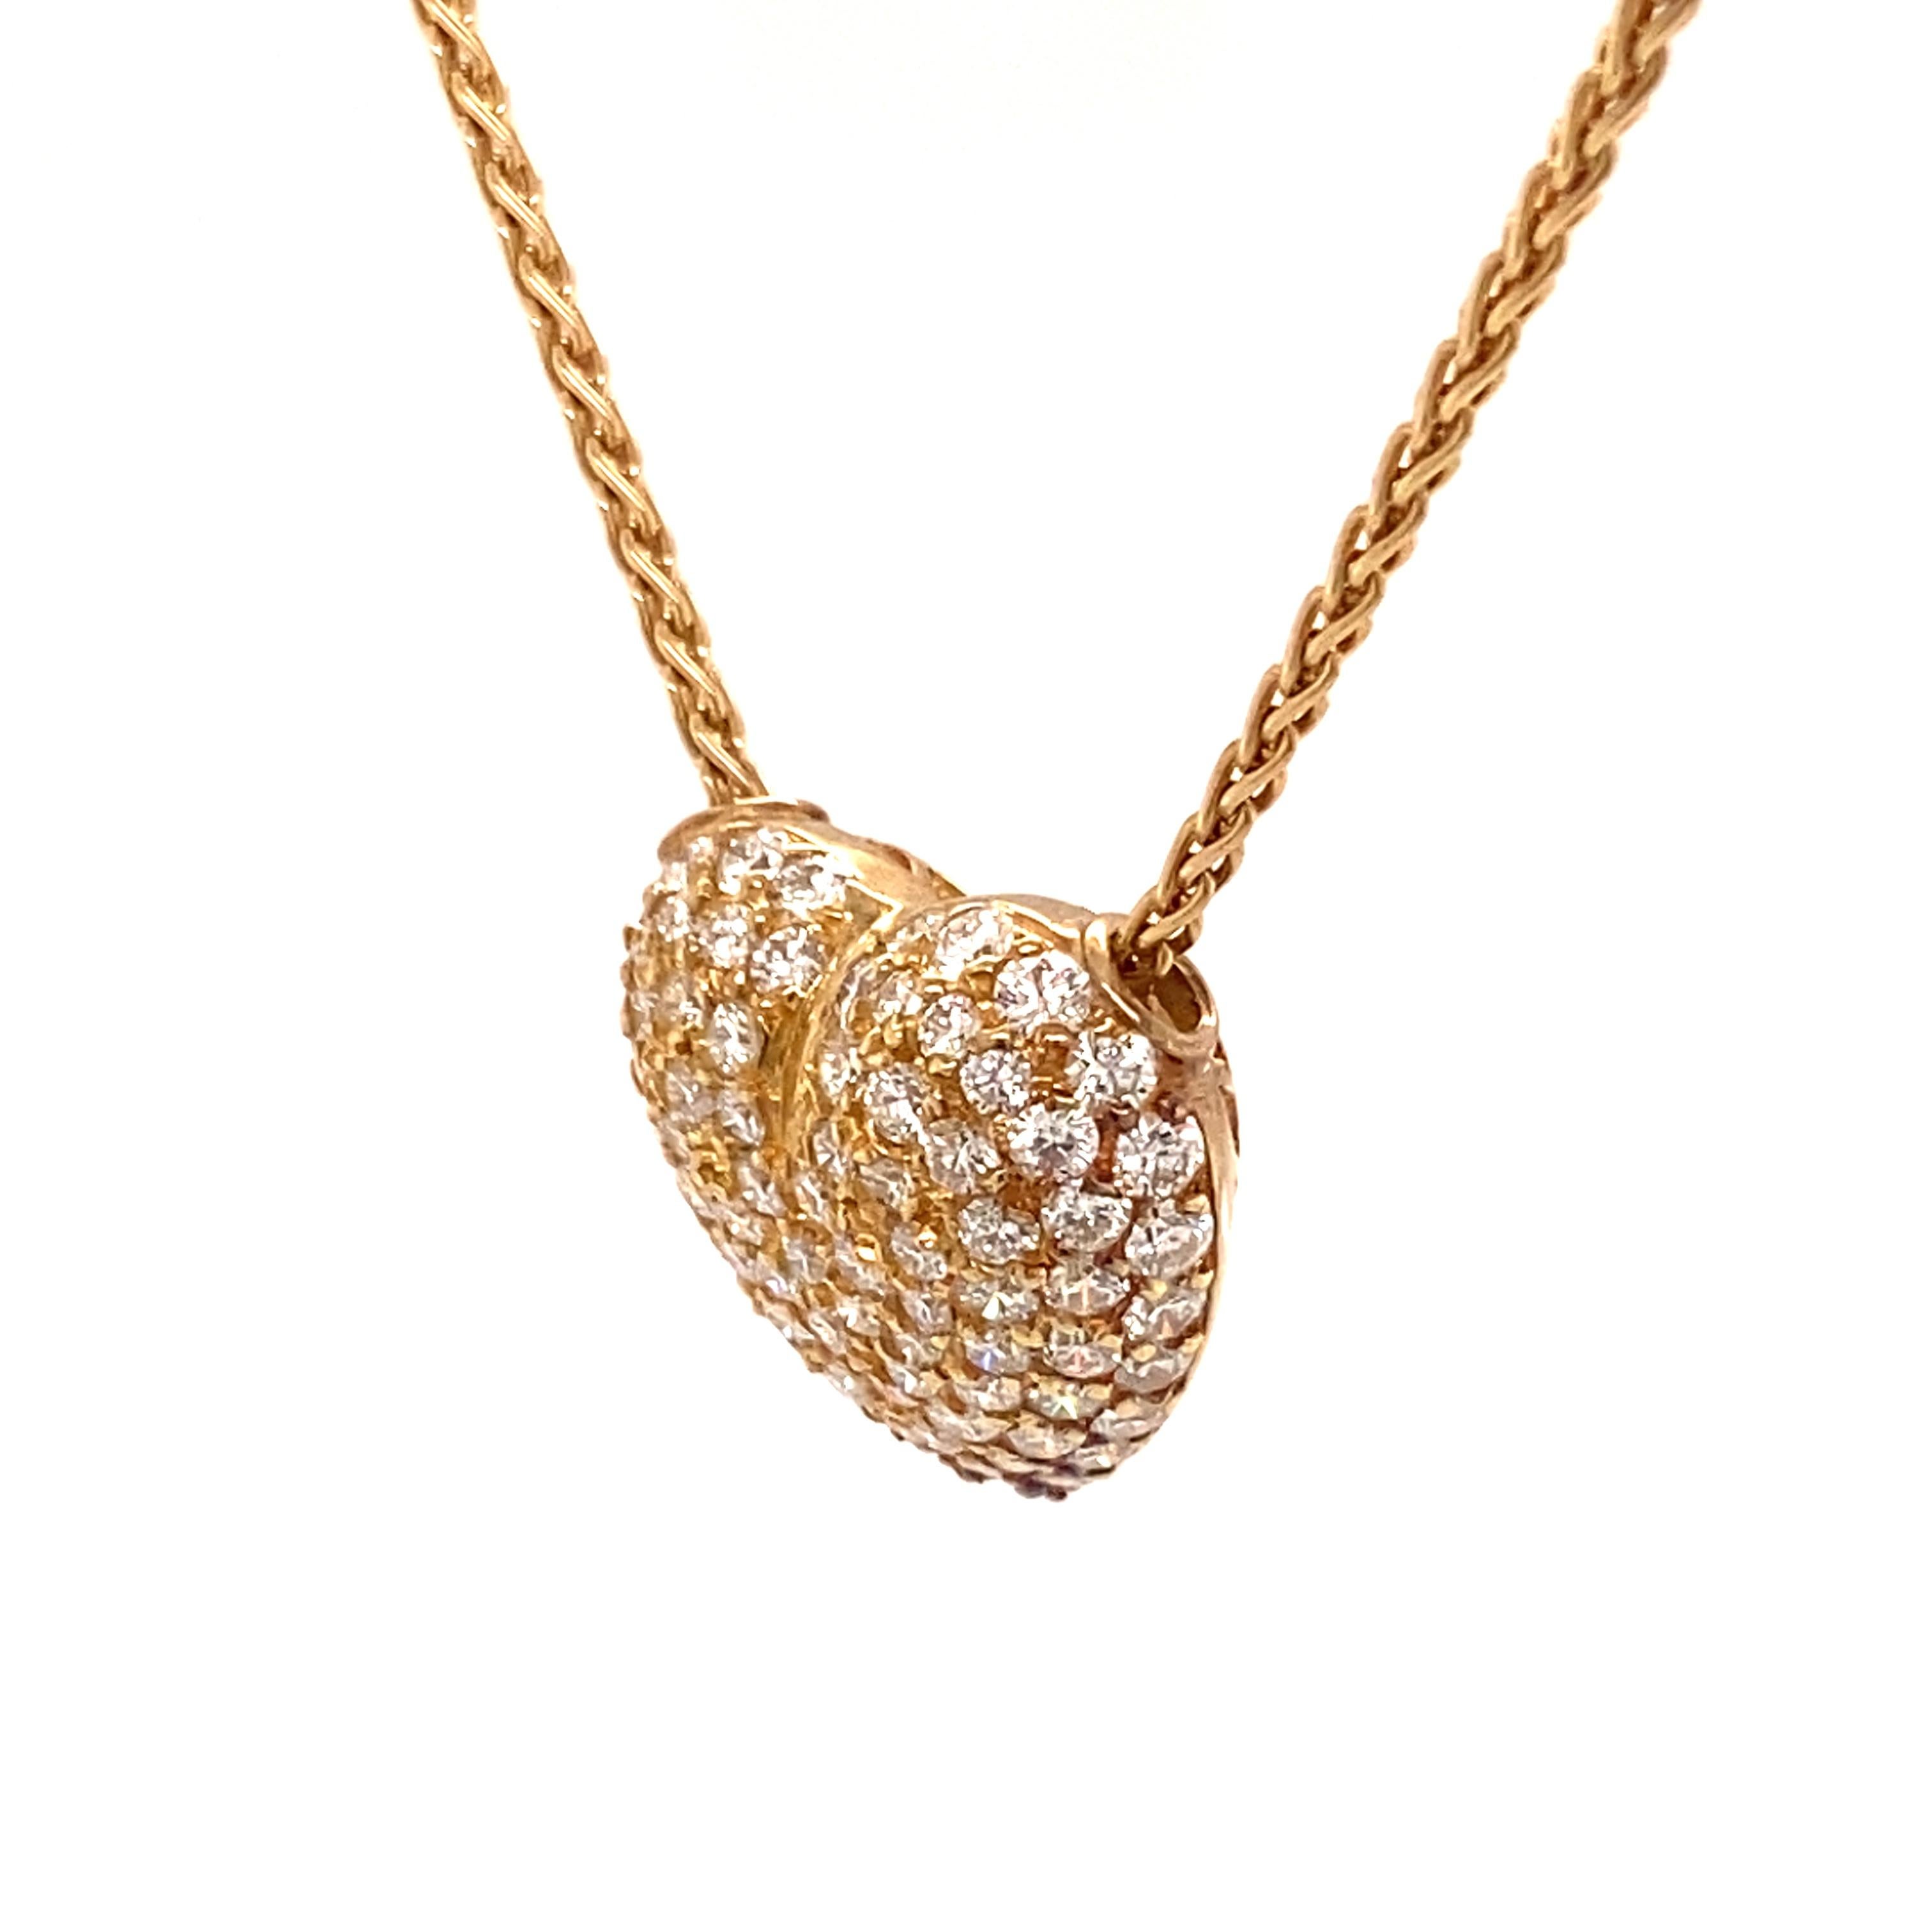 Item Details:
Gemstone: Diamond
Metal: 18 Karat Yellow Gold
Size:   inches
Weight:  10.19 grams

Diamond Details:
Cut: Round
Carat: 3.50 carat total weight
Color: G
Clarity: VS

Item Features:
This necklace made in the 1950s features 3.50 carat